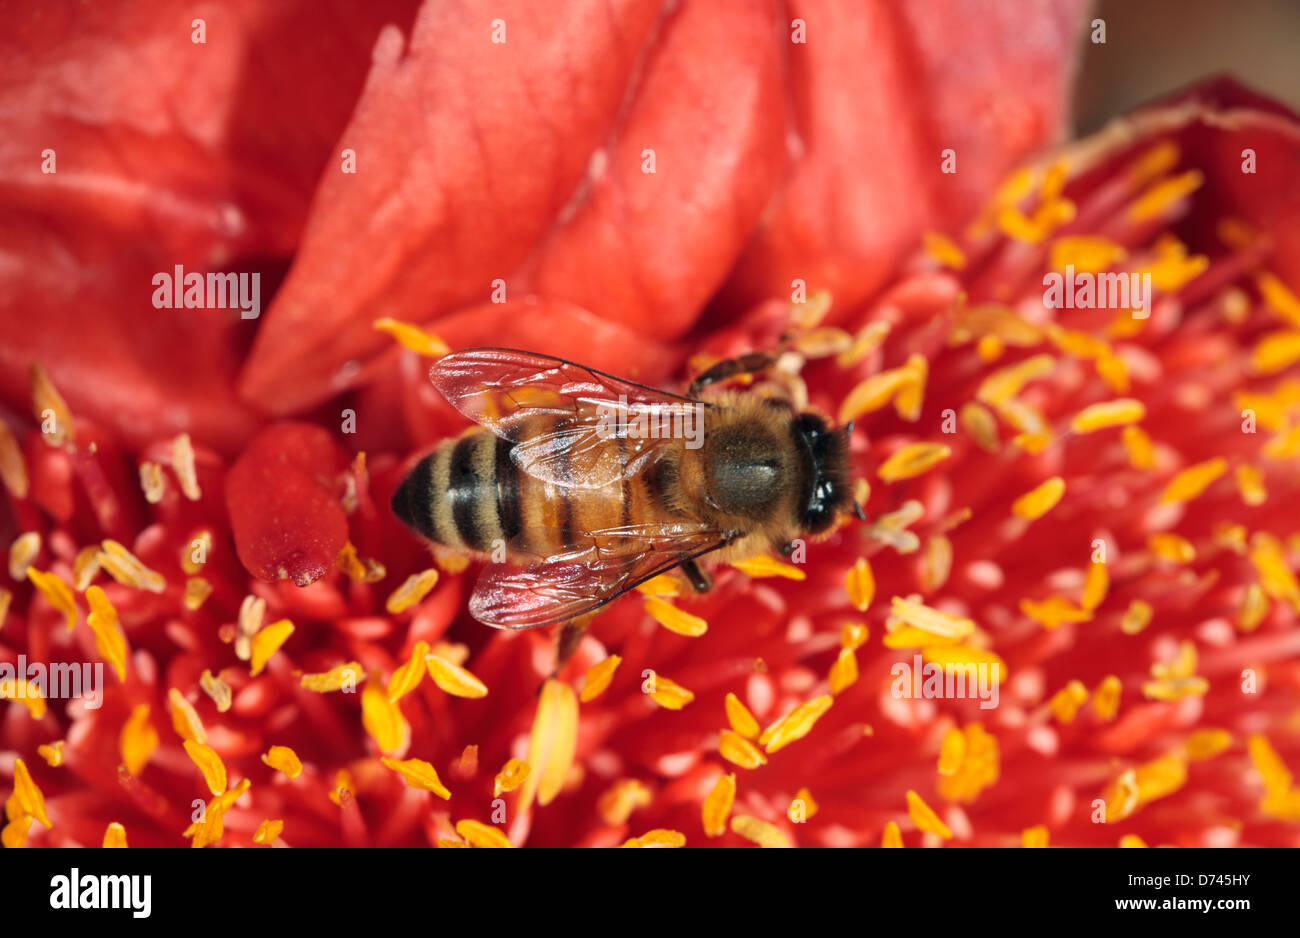 Honey Bee [Apis mellifera -Family Apidae]  collecting pollen from Haemanthus flower- [ Blood Lily - family Amaryllidoideae] Stock Photo